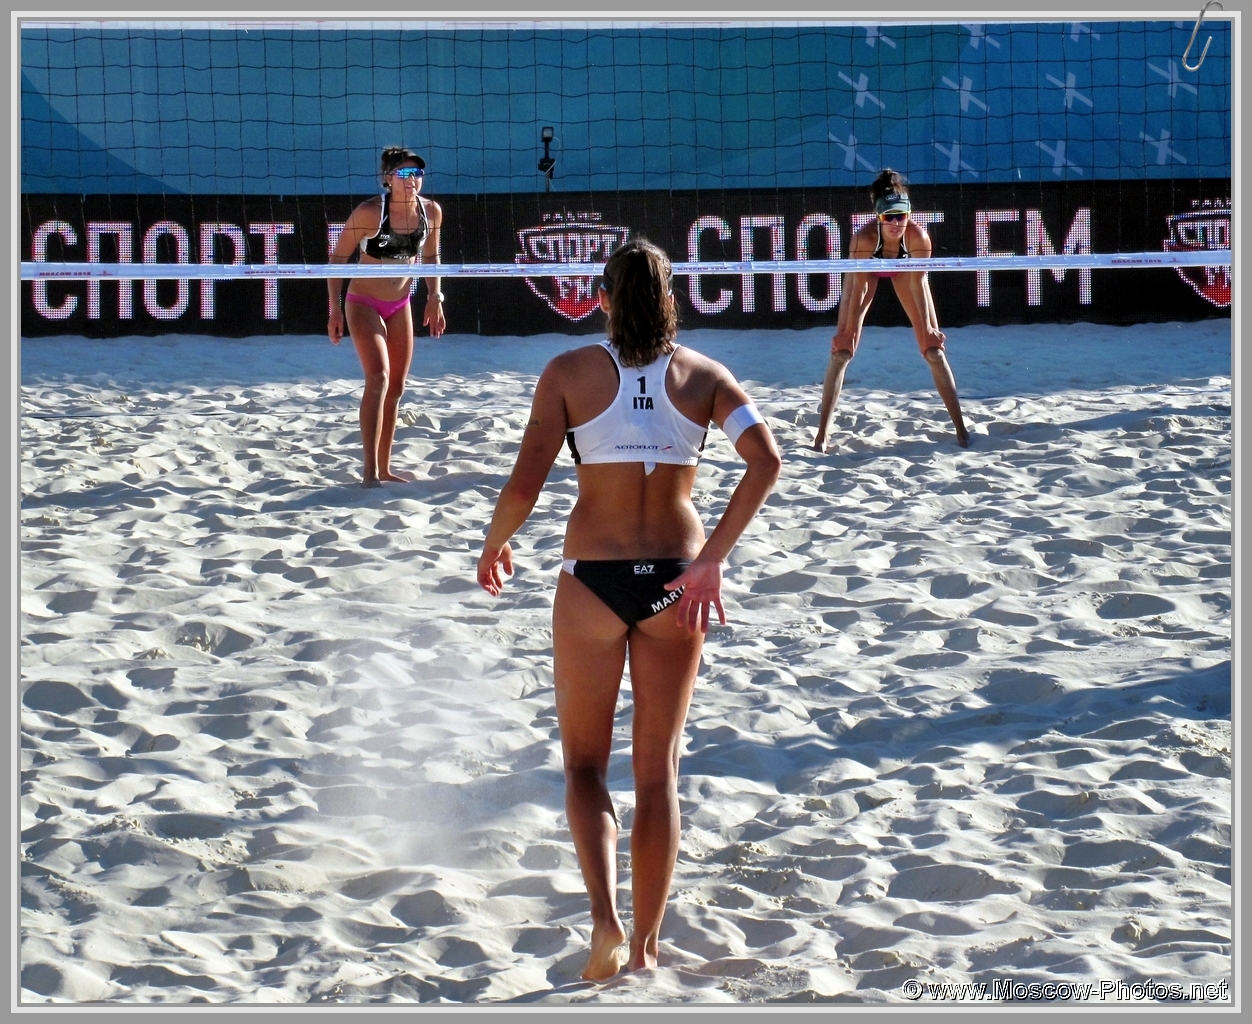 Marta Menegatti at FIVB Beach Volleyball World Tour in Moscow 2018